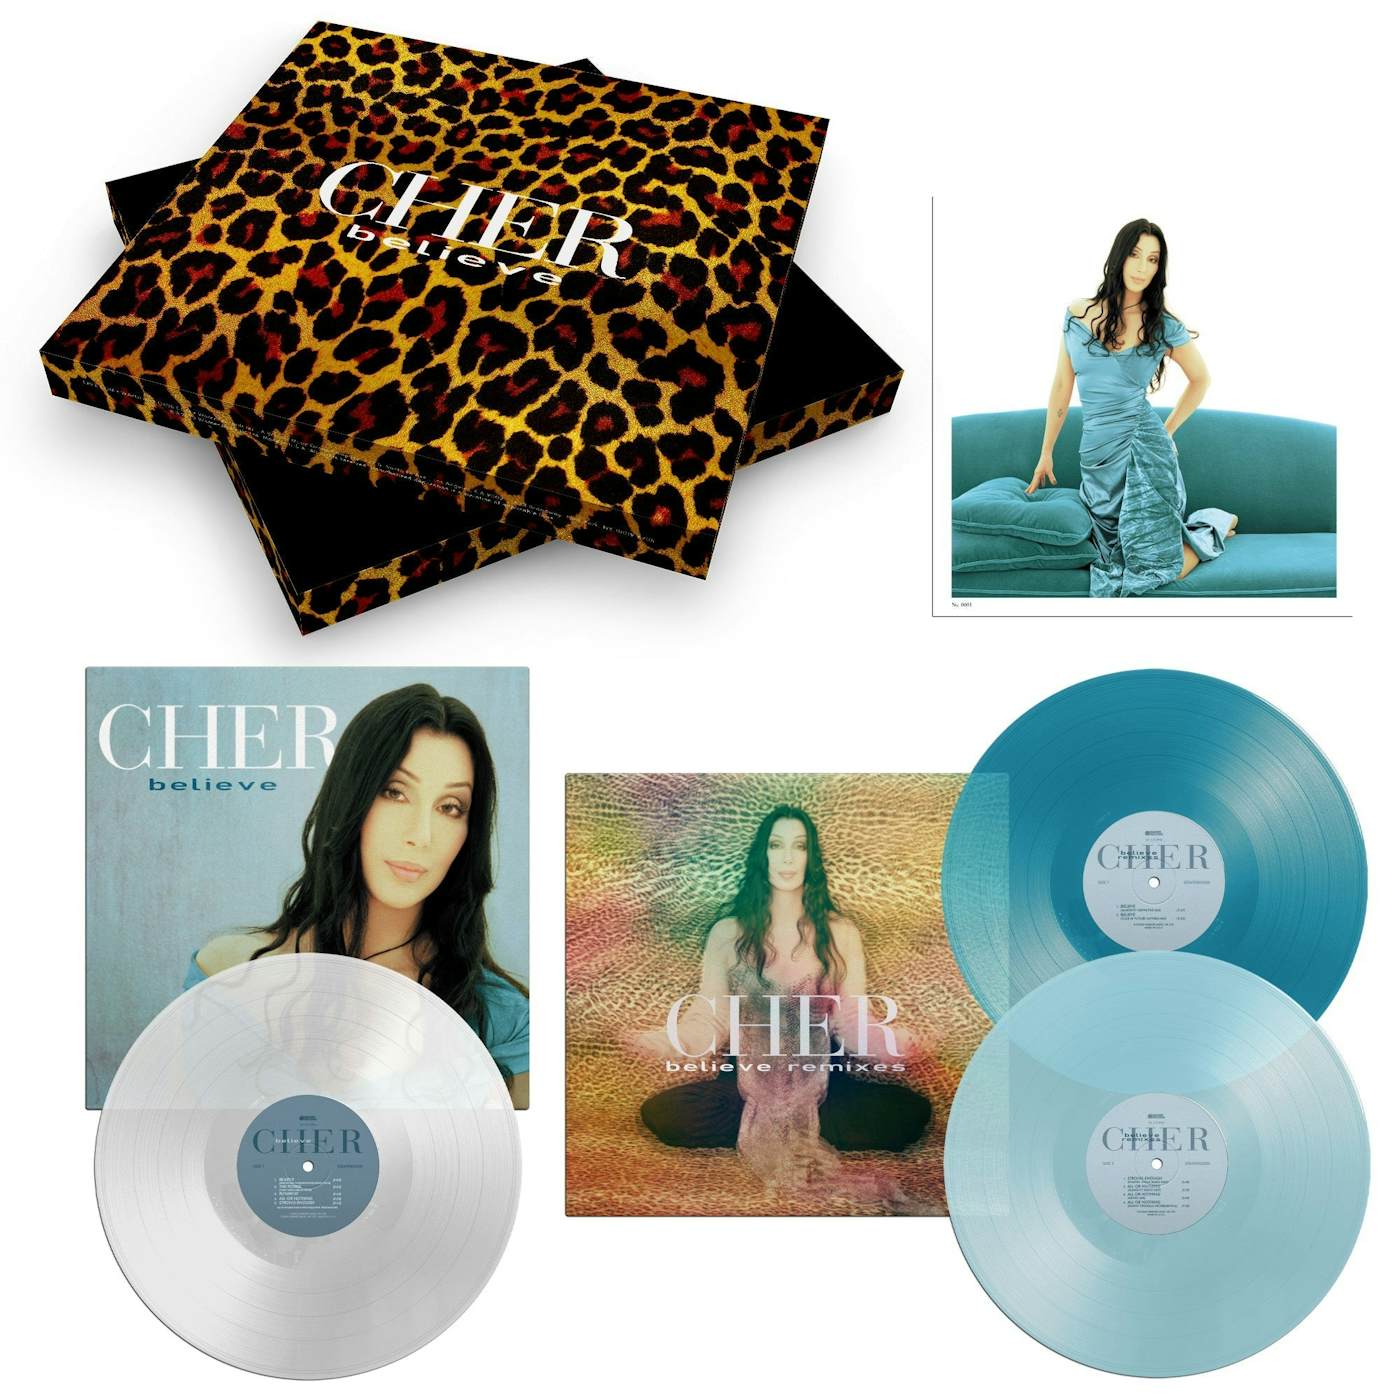 Cher Believe (25th Anniversary Deluxe Edition) (Colored 3LP)